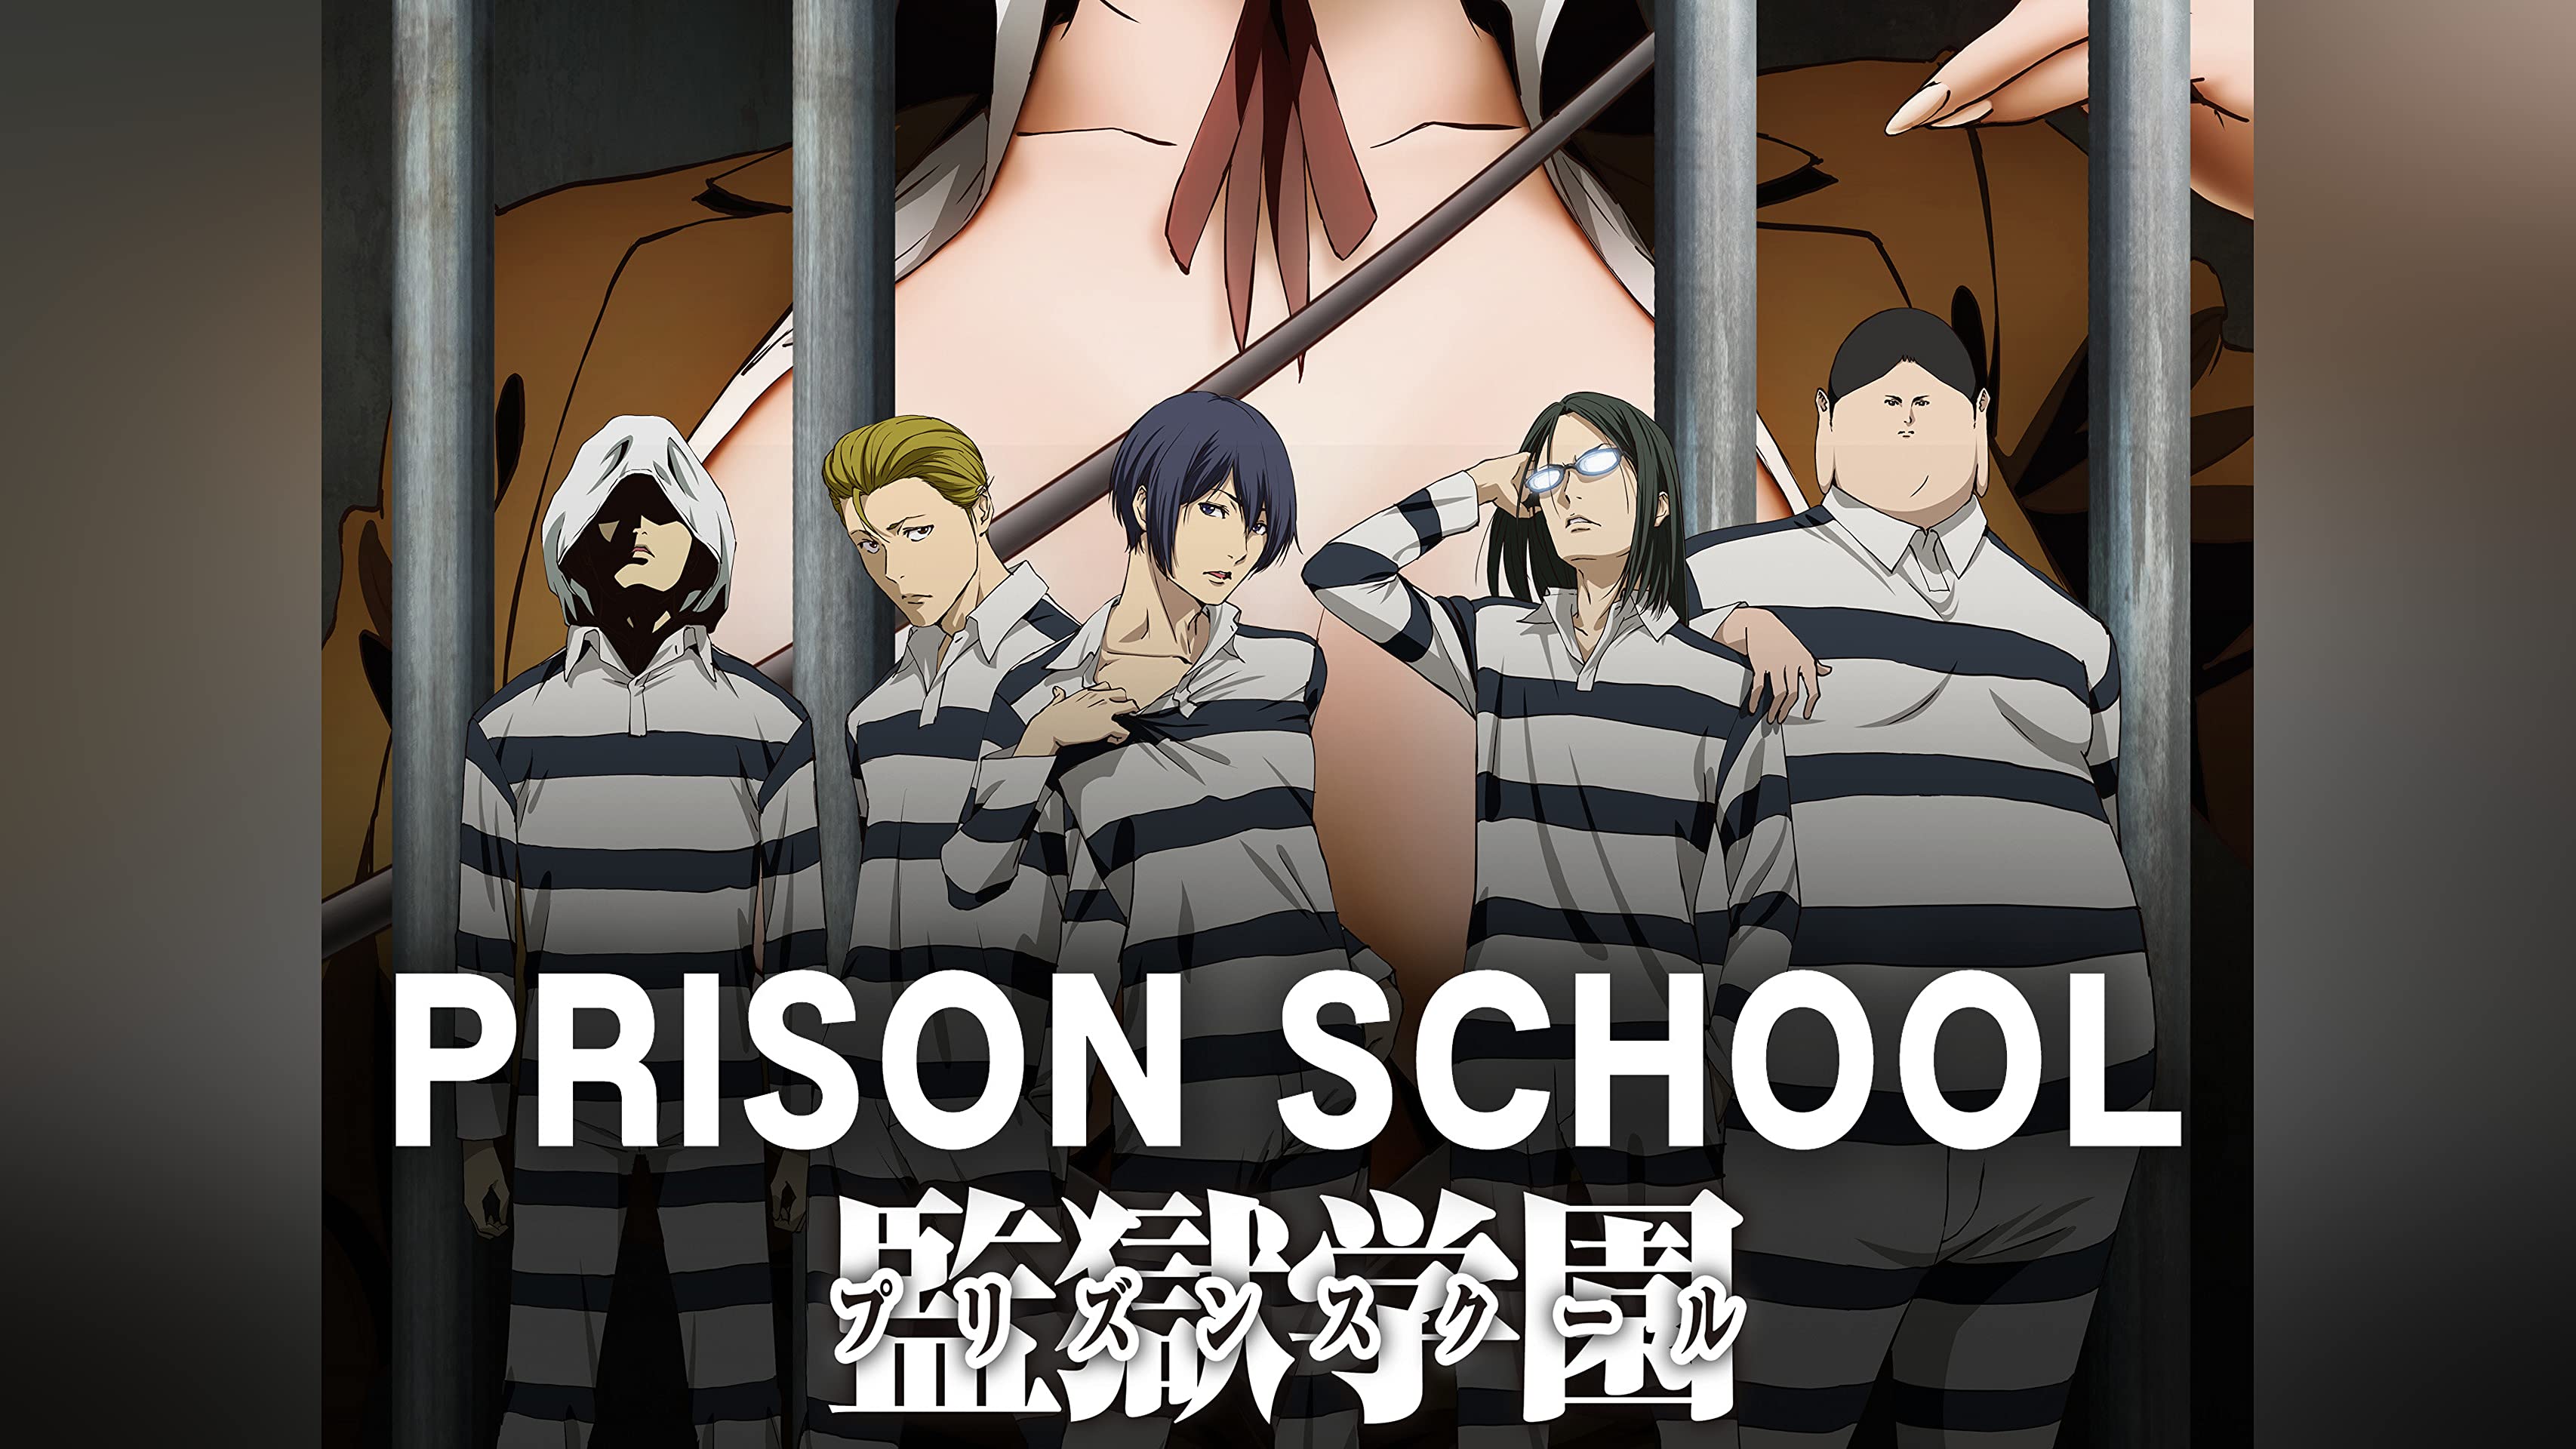 david meiring recommends Prison School Ep 4